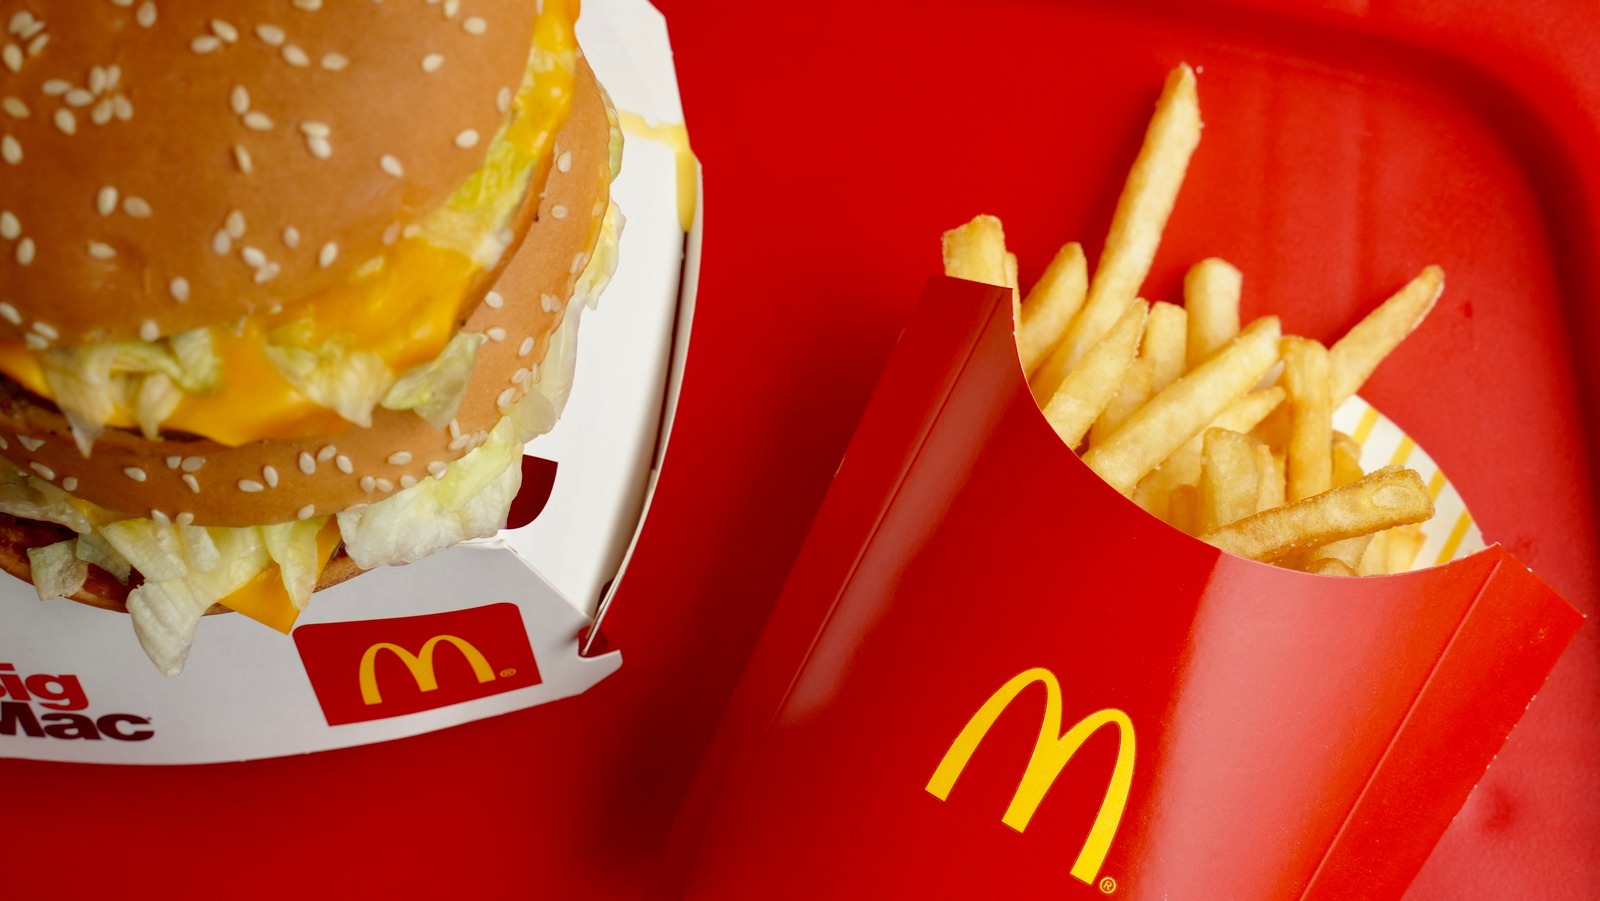 McDonald's New Restaurant Brand CosMc's Is Coming To A Galaxy Near You